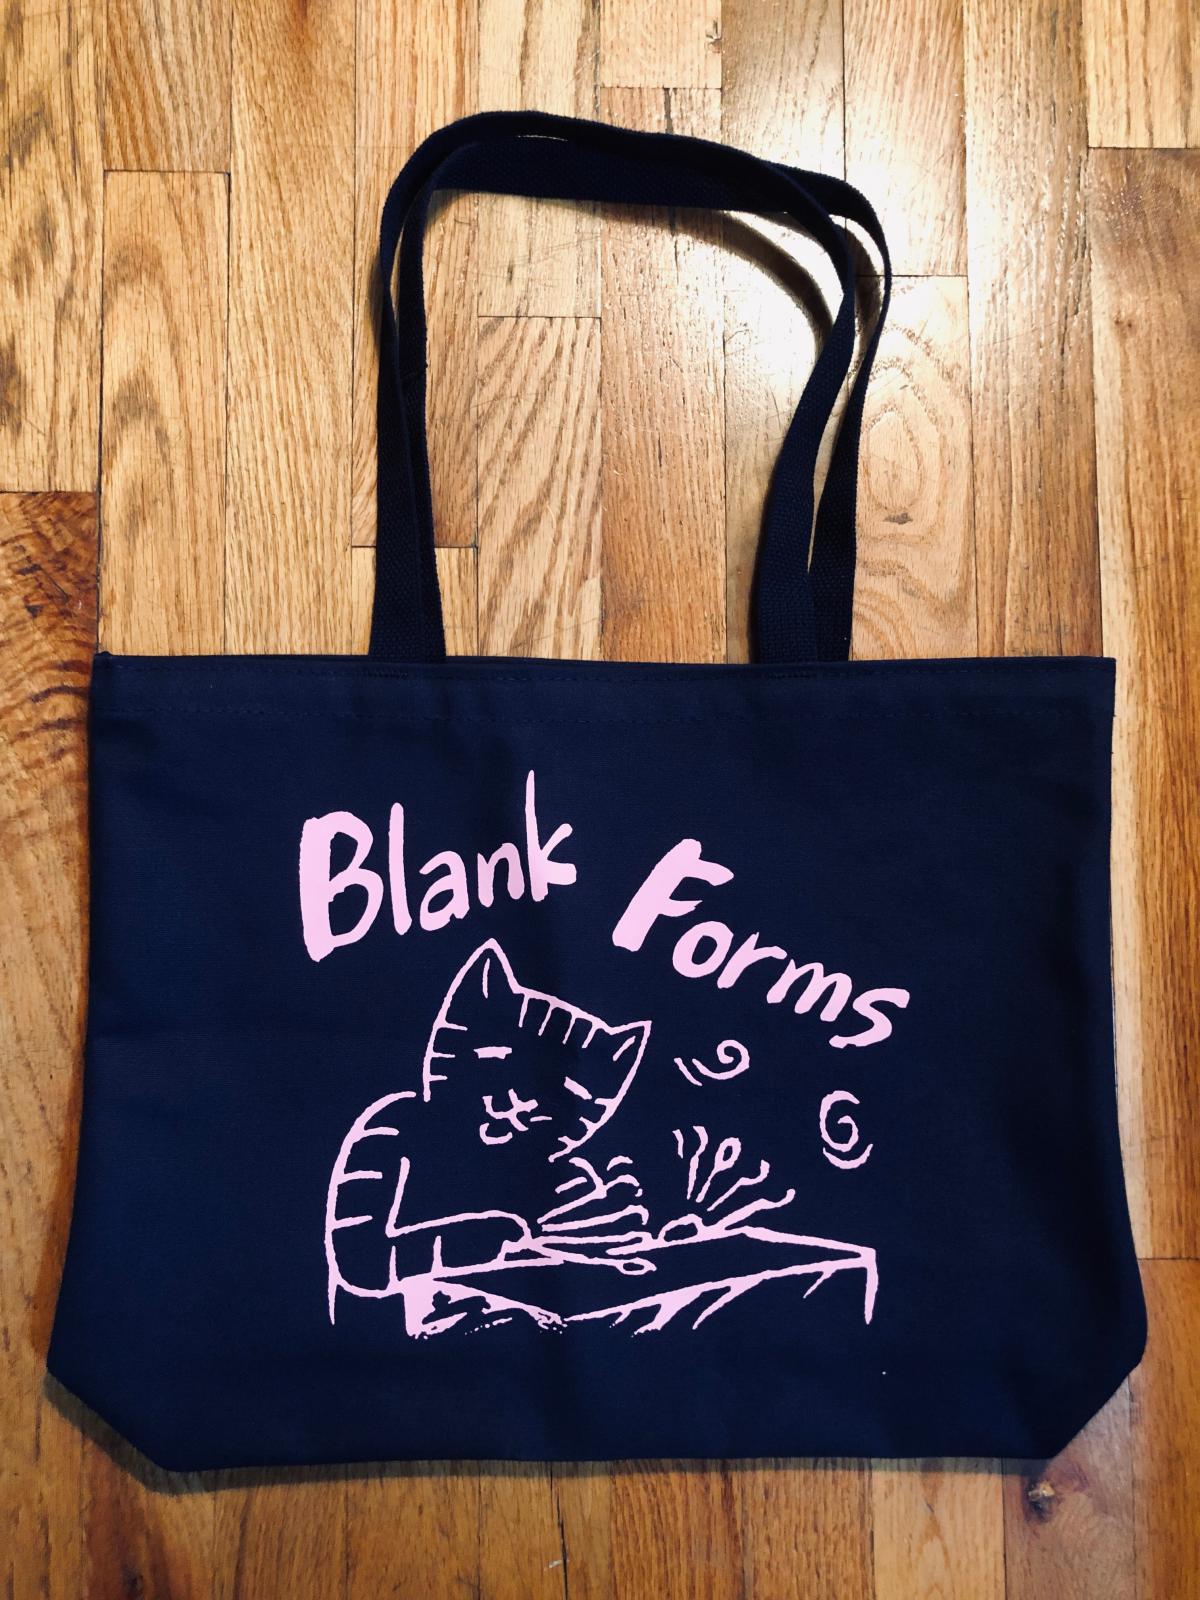 Blank Forms Tote Bag